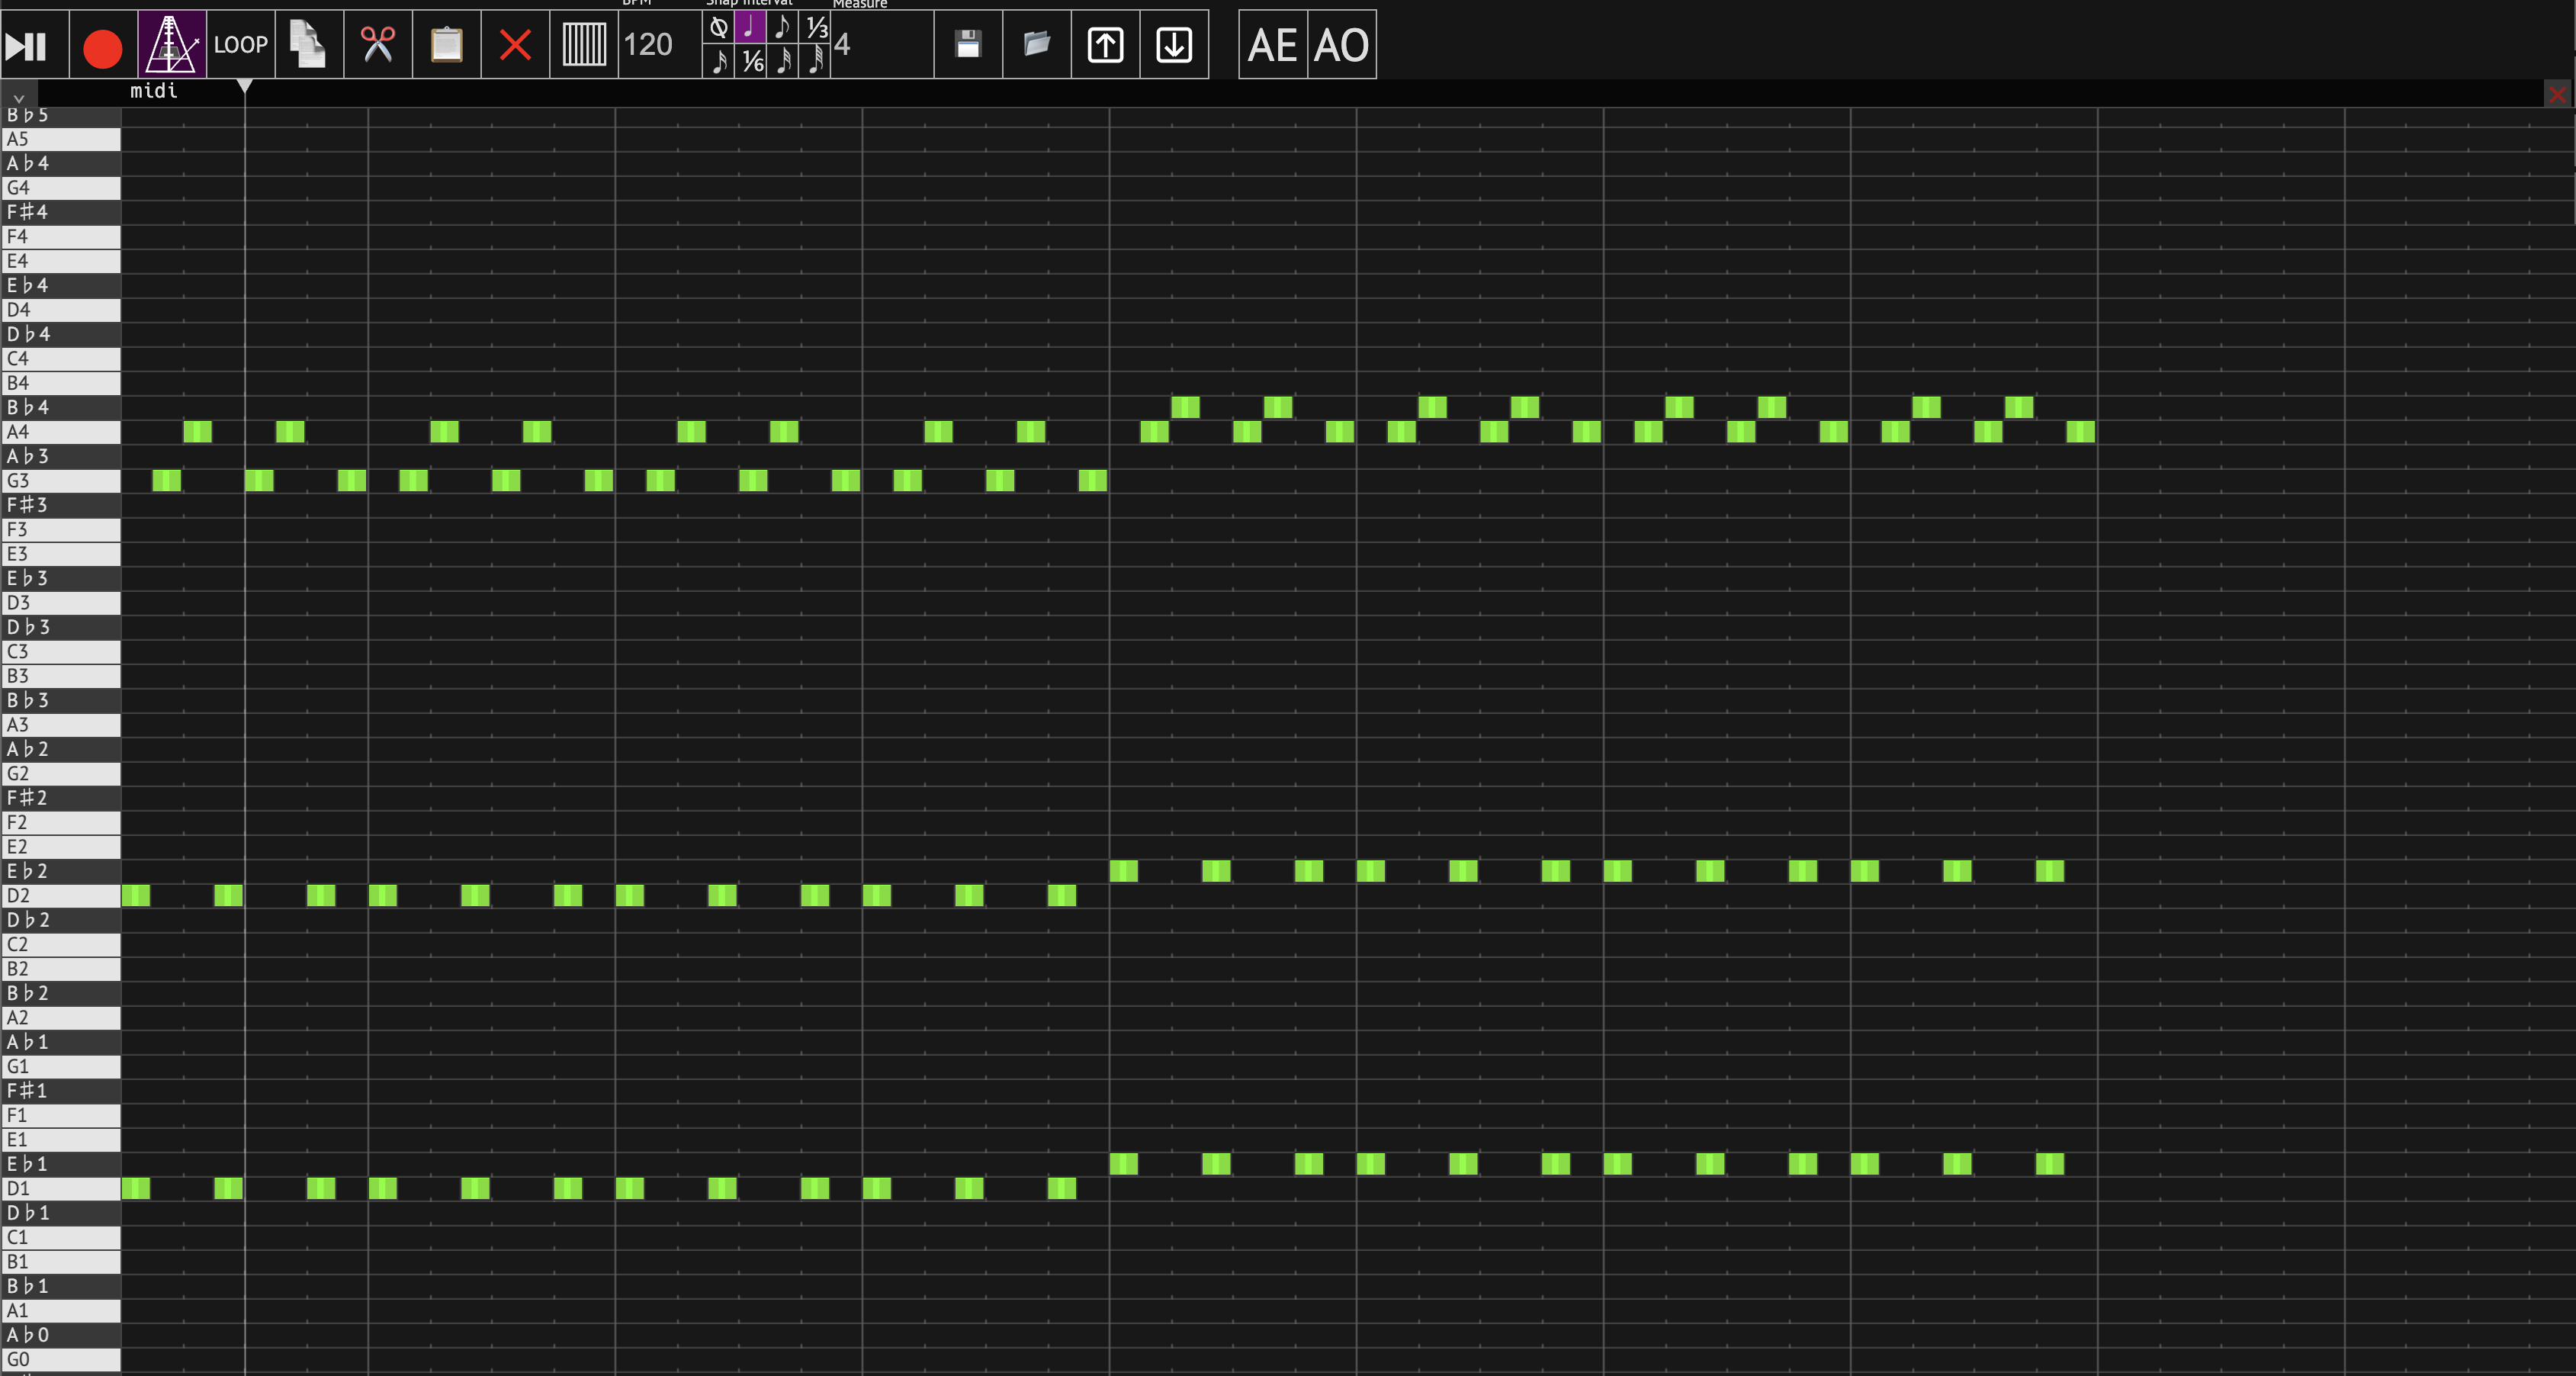 Screenshot of a MIDI editor web UI.  There are a few dozen rows of notes with a labeled piano keyboard on the left.  There are green notes arrayed along the composition.  There is a toolbar with a variety of buttons with icons for controlling the MIDI editor on the top.